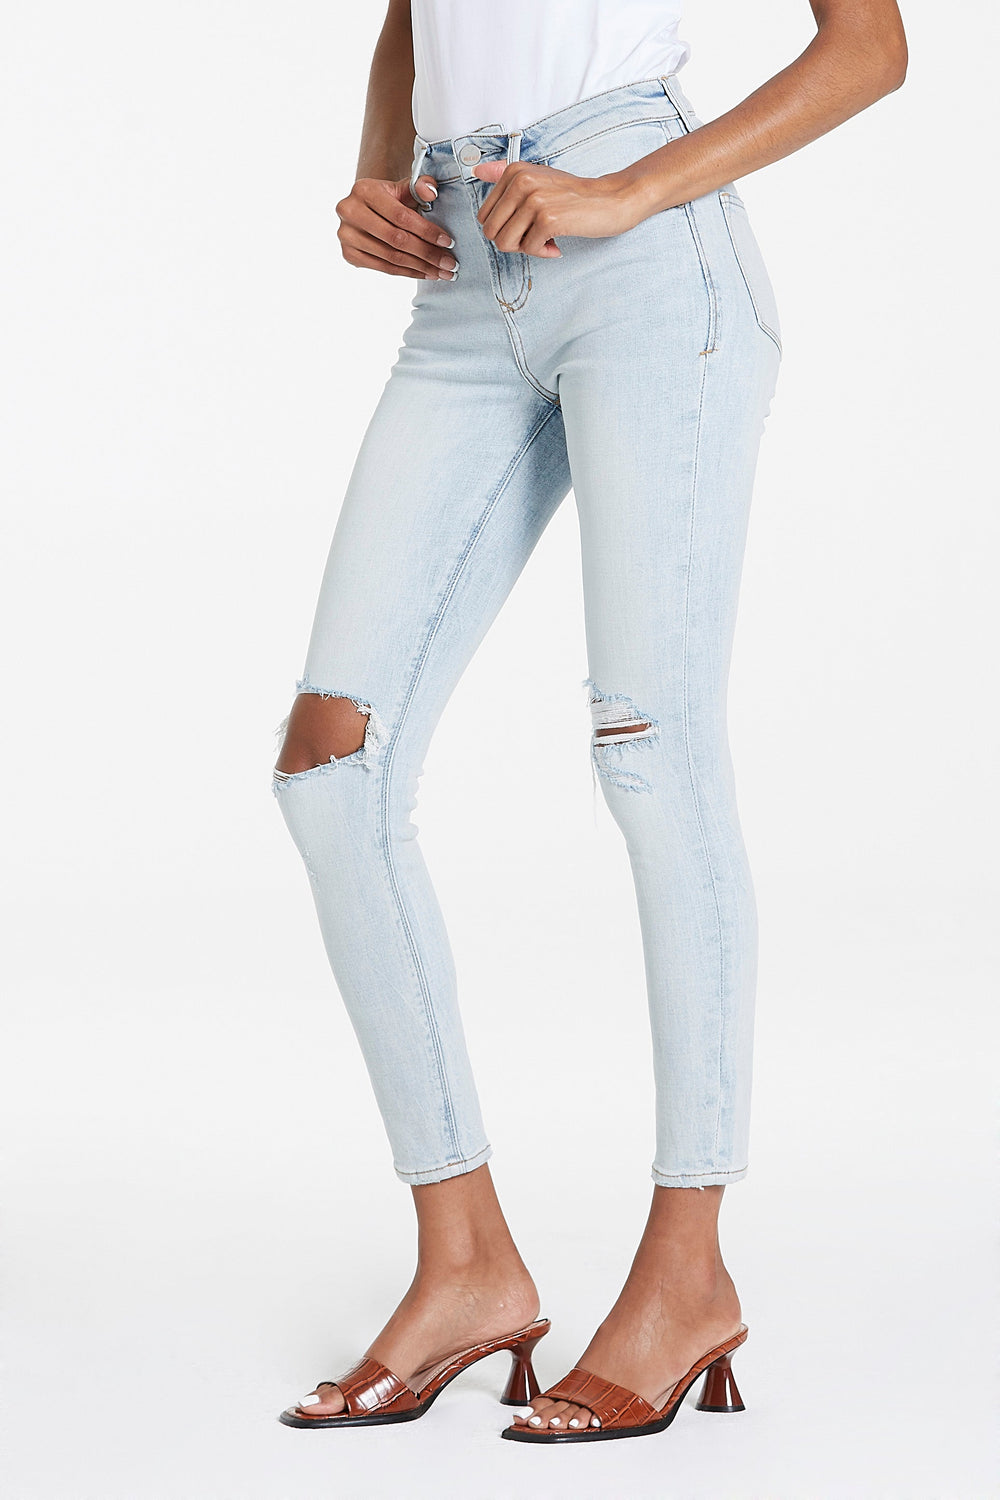 image of a female model wearing a OLIVIA SUPER HIGH RISE ANKLE SKINNY JEANS BLUE WATER JEANS